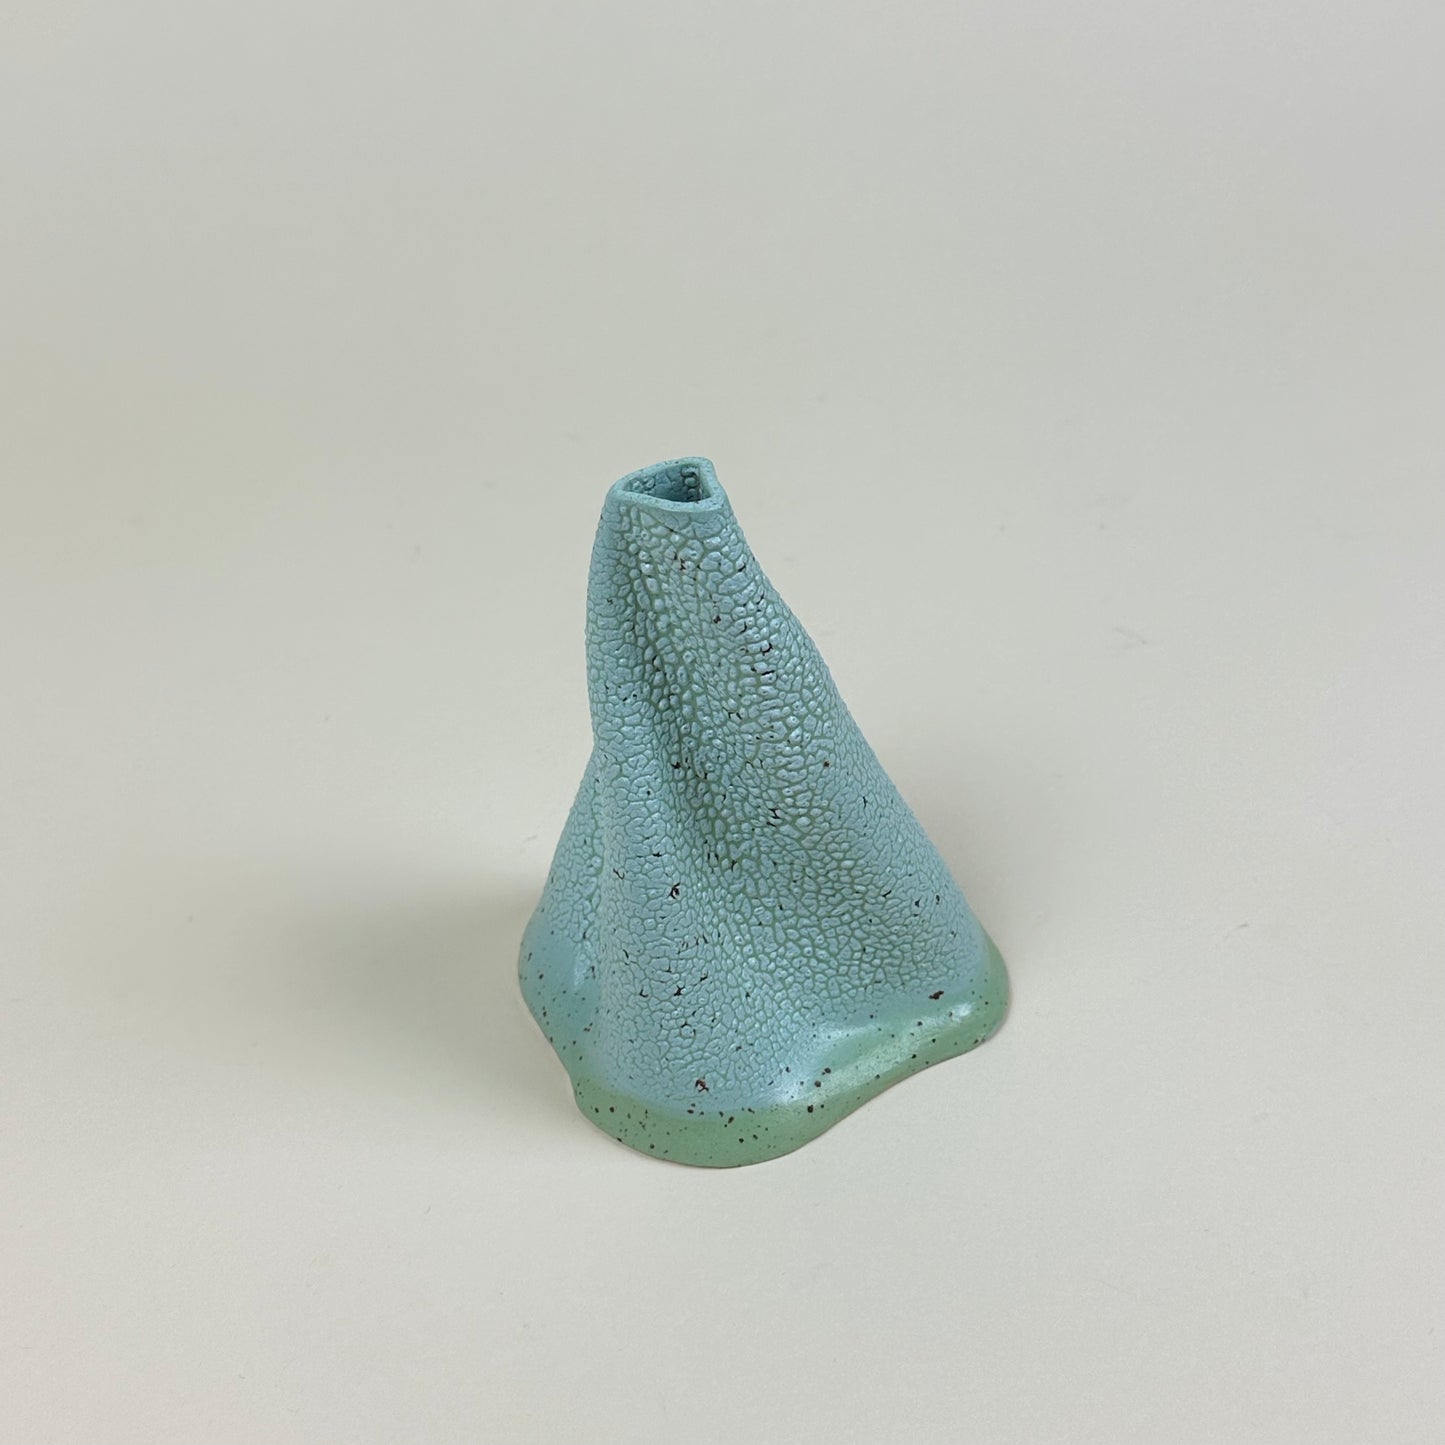 Turquoise and aqua volcano vase (L) by Astrid Öhman.